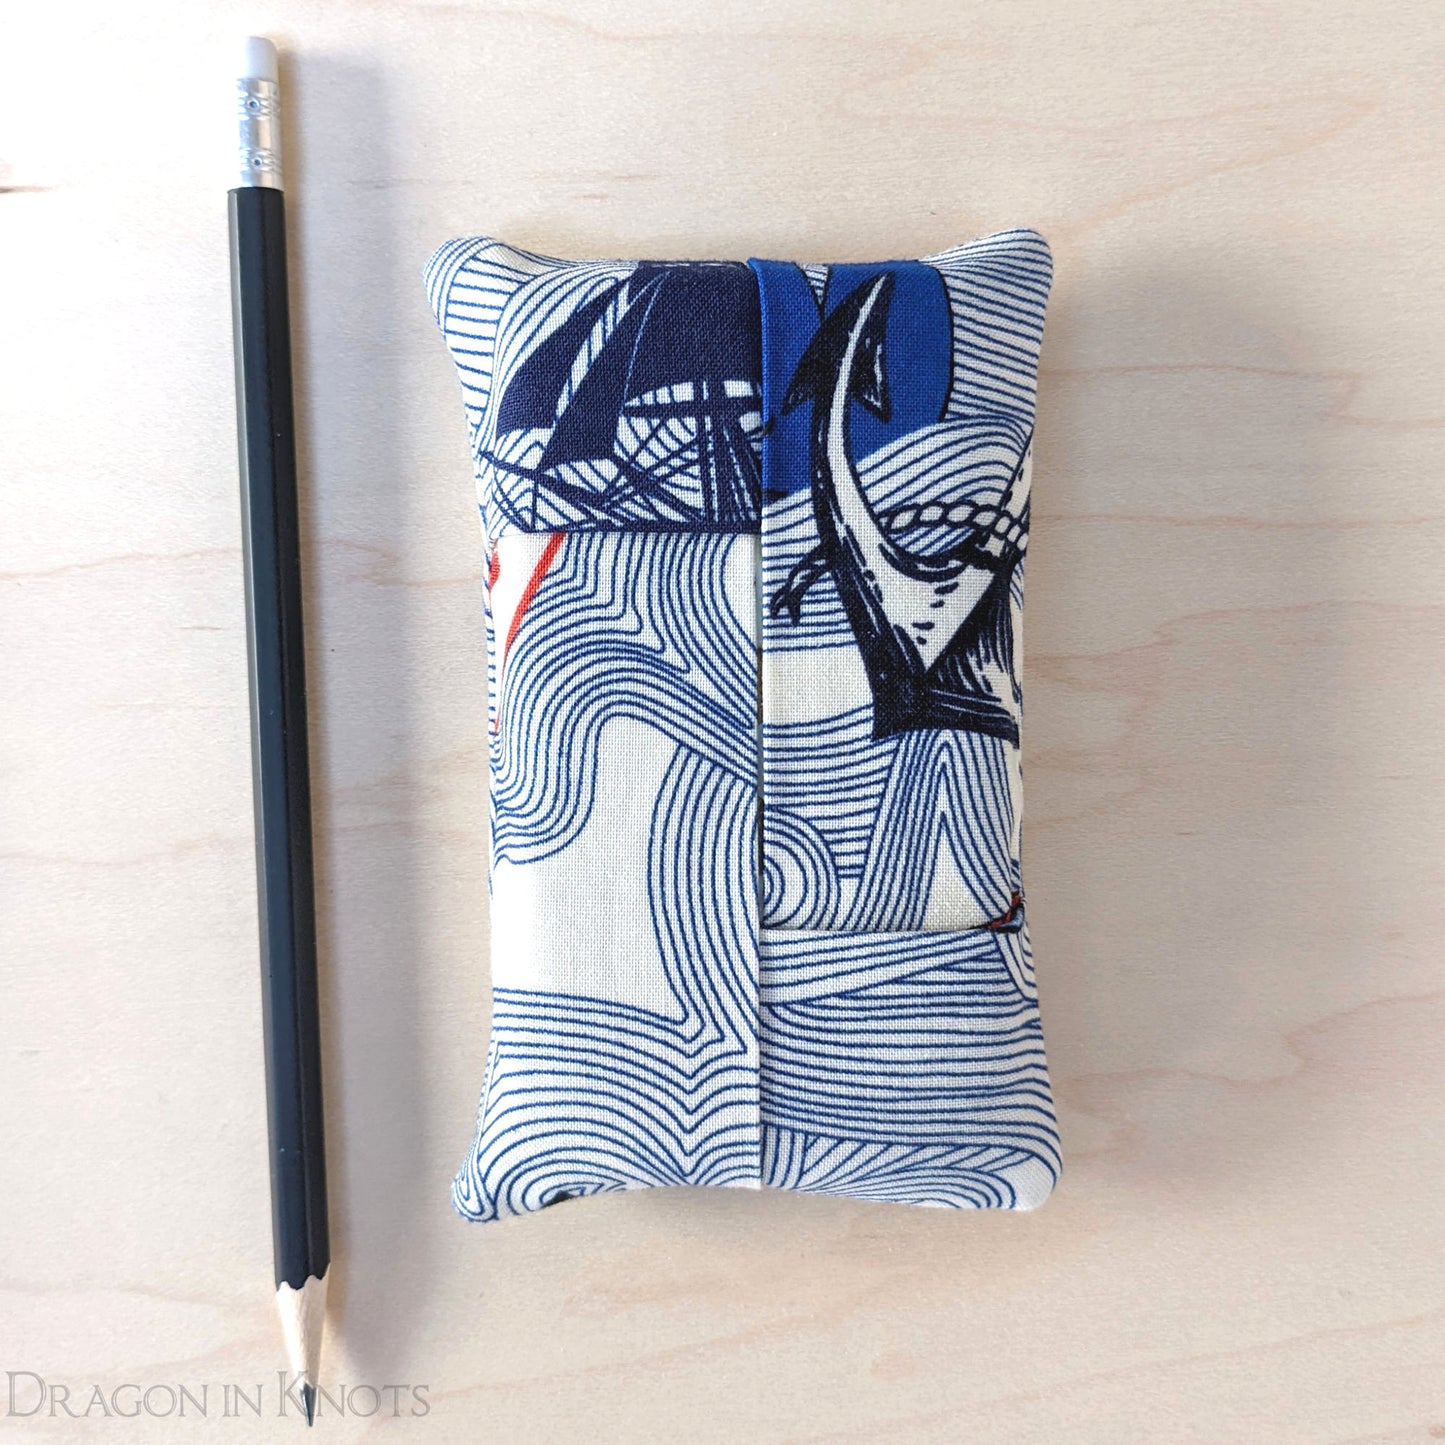 Out to Sea Pocket Tissue Holder - Dragon in Knots handmade